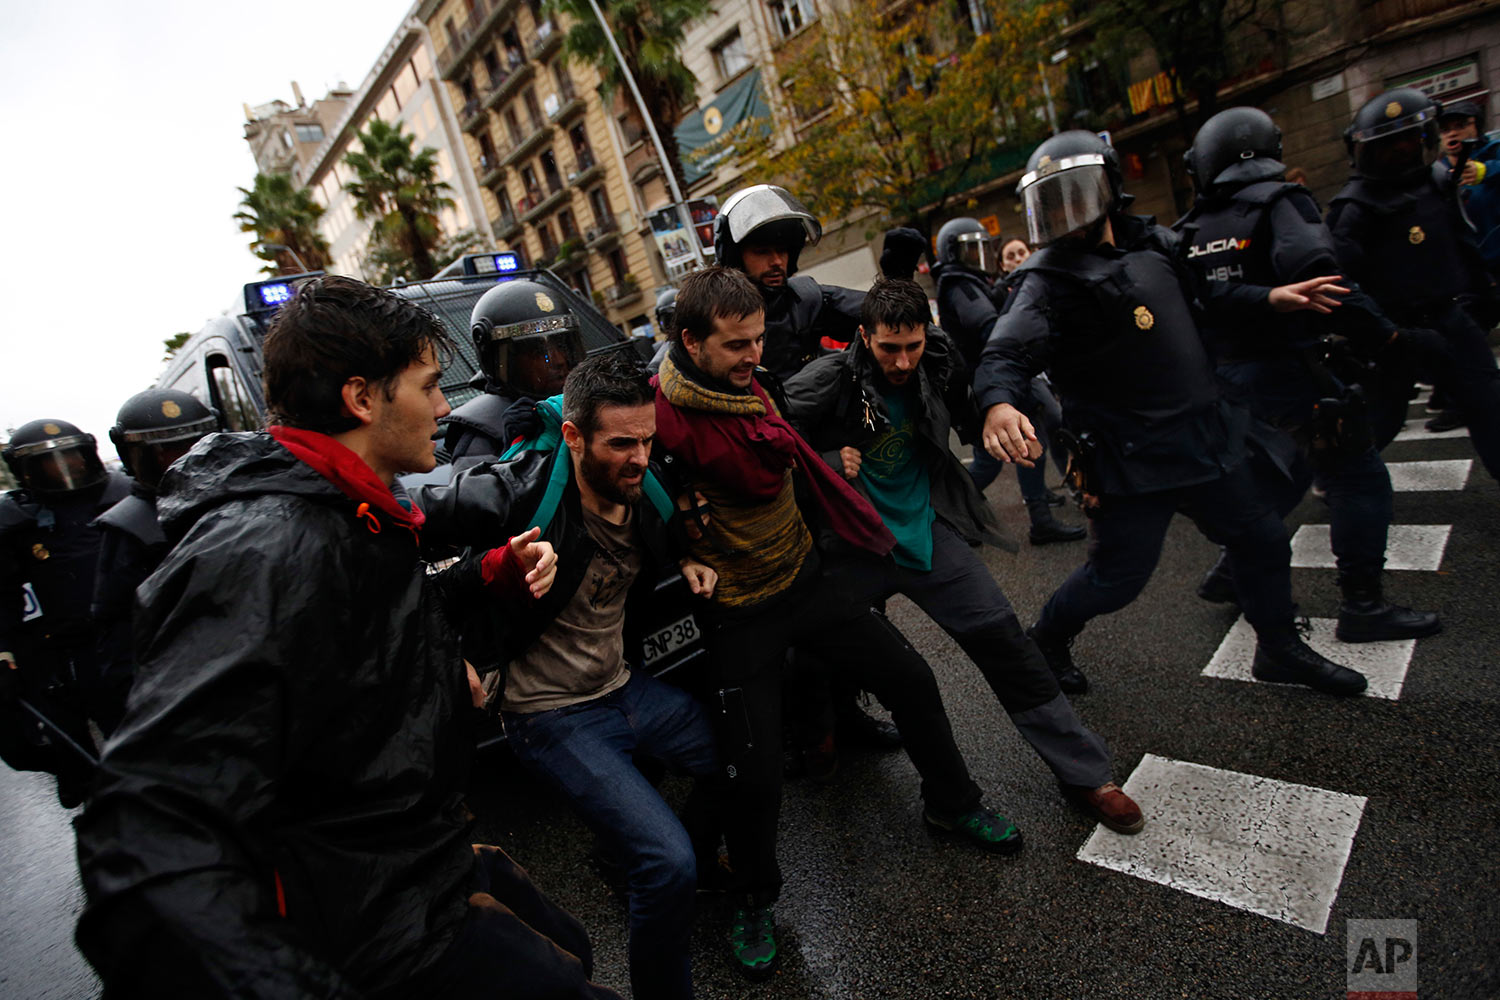  Spanish National Police push away Pro-referendum supporters outside the Ramon Llull school assigned to be a polling station by the Catalan government in Barcelona, Spain, early Sunday, Oct. 1, 2017. Catalan pro-referendum supporters vowed to ignore 